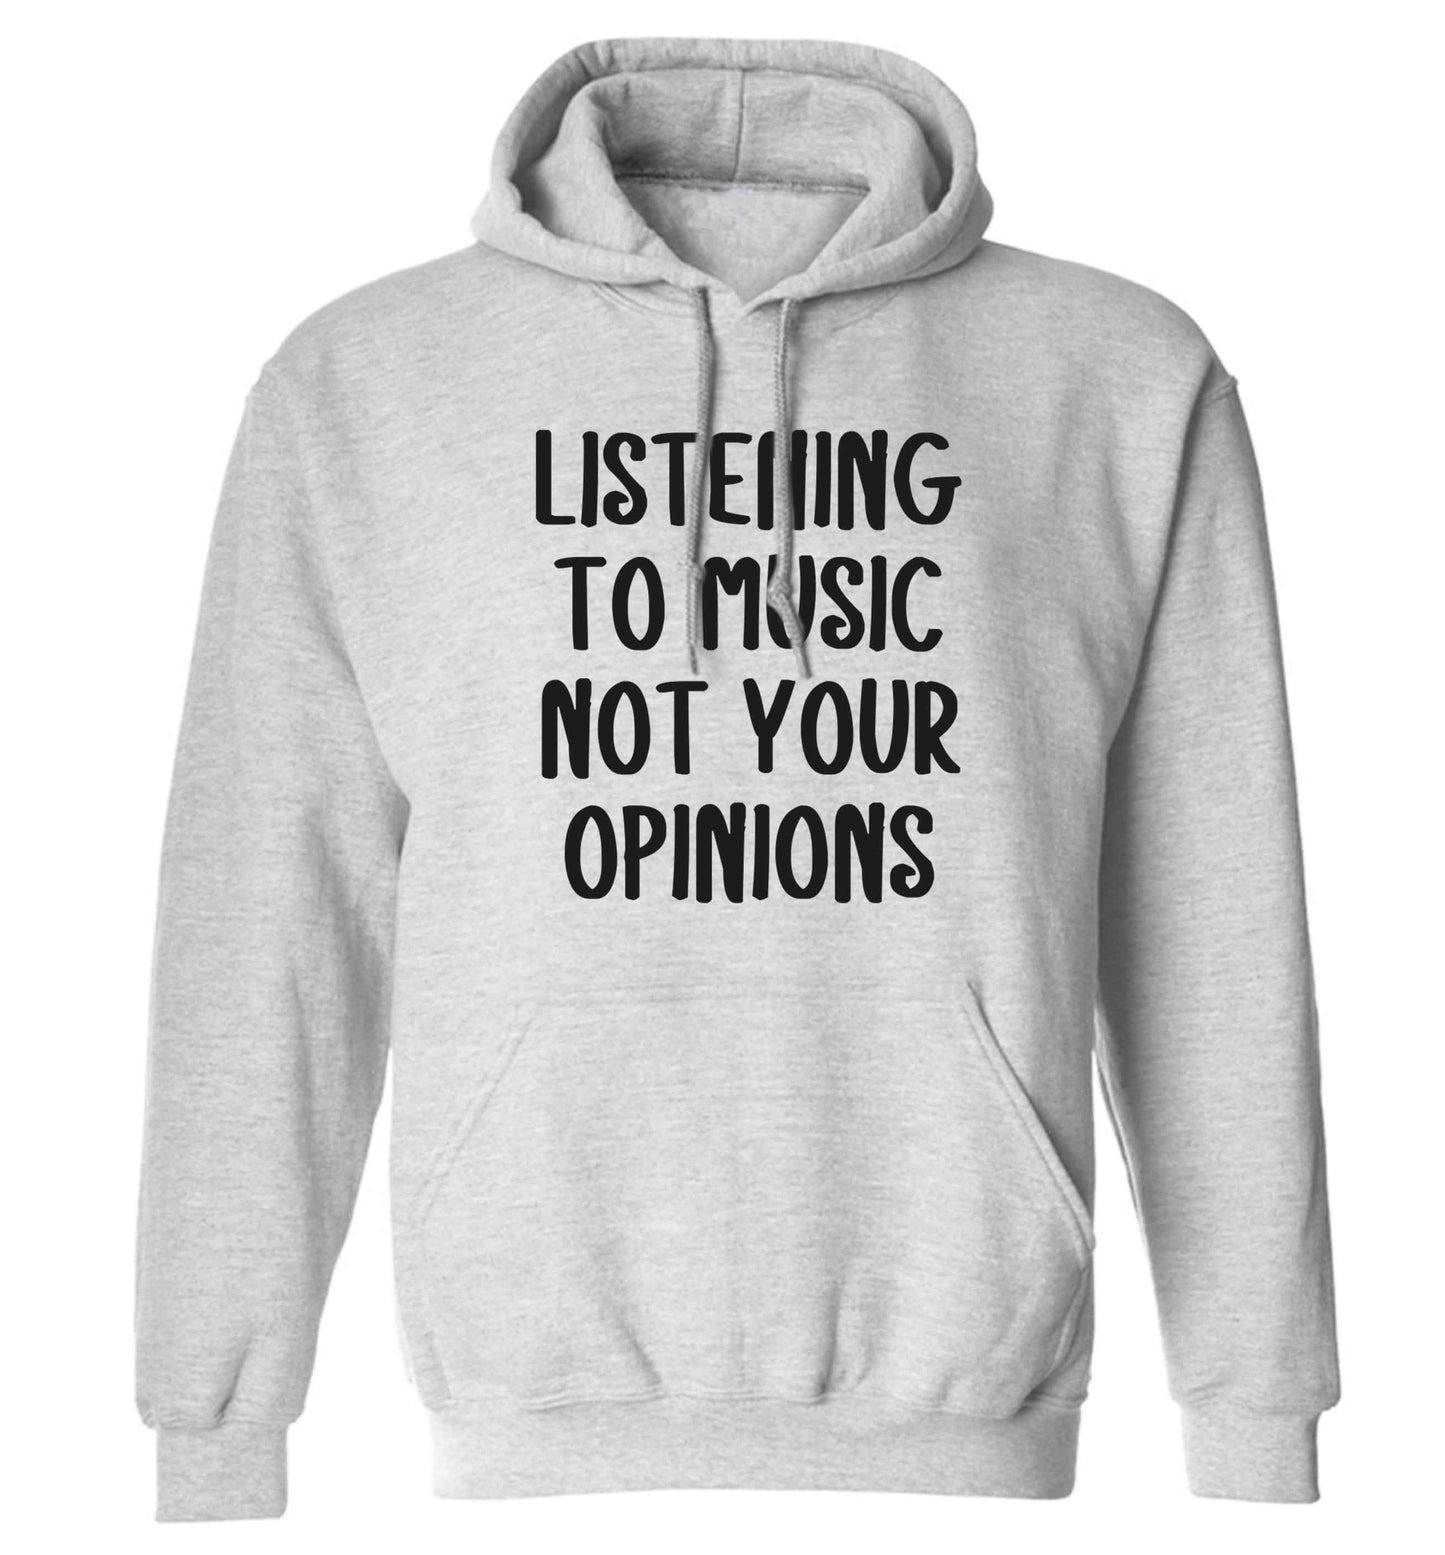 Listening to music not your opinions adults unisex grey hoodie 2XL